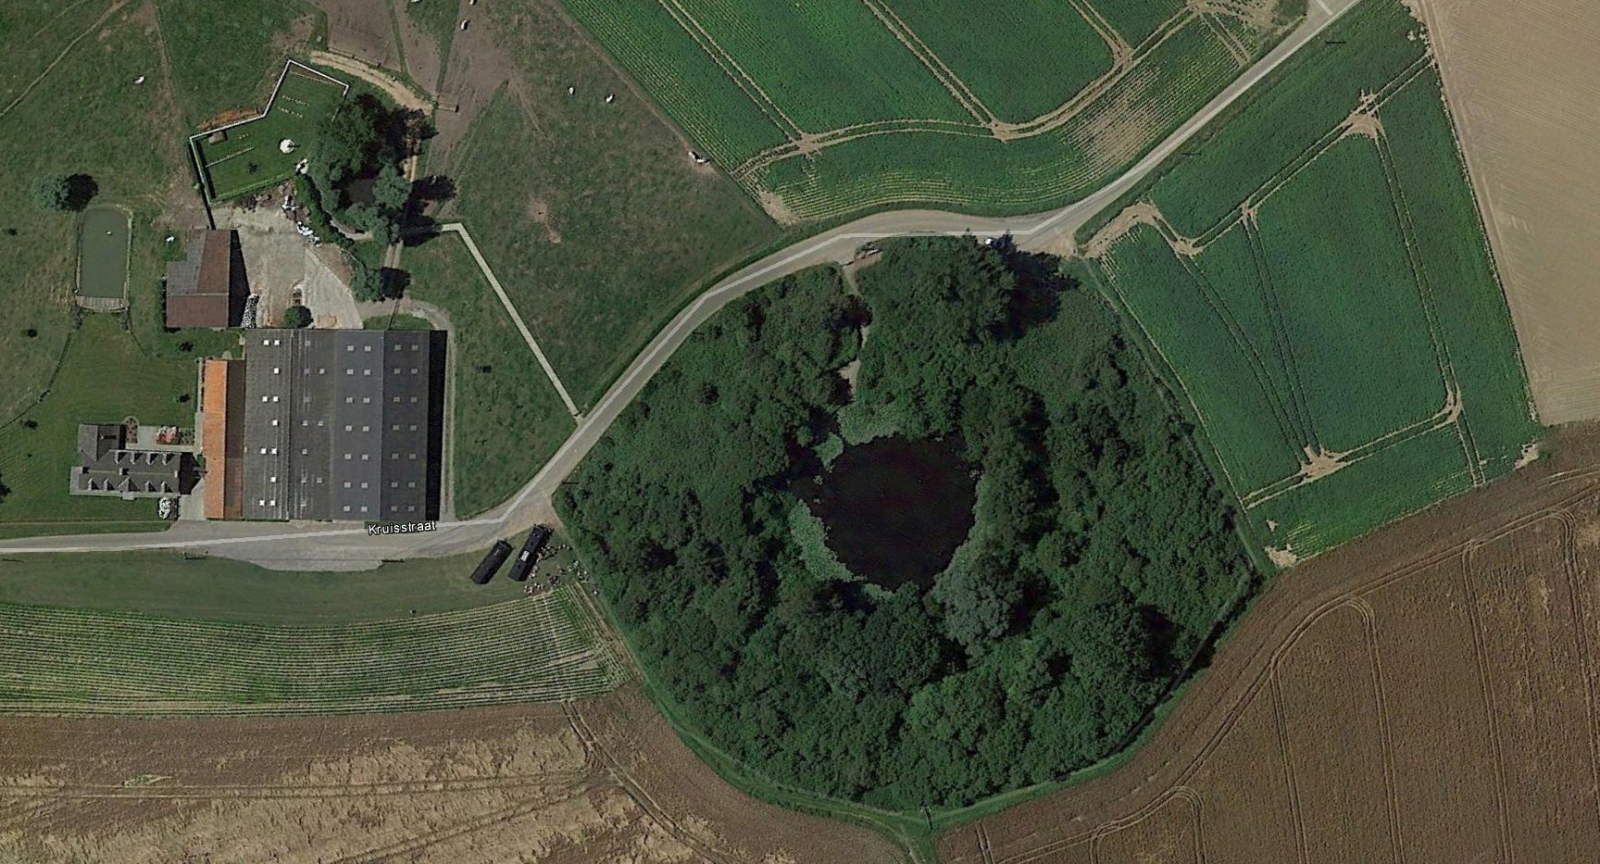 Aerial view of the Spanbroekmoler Crater today